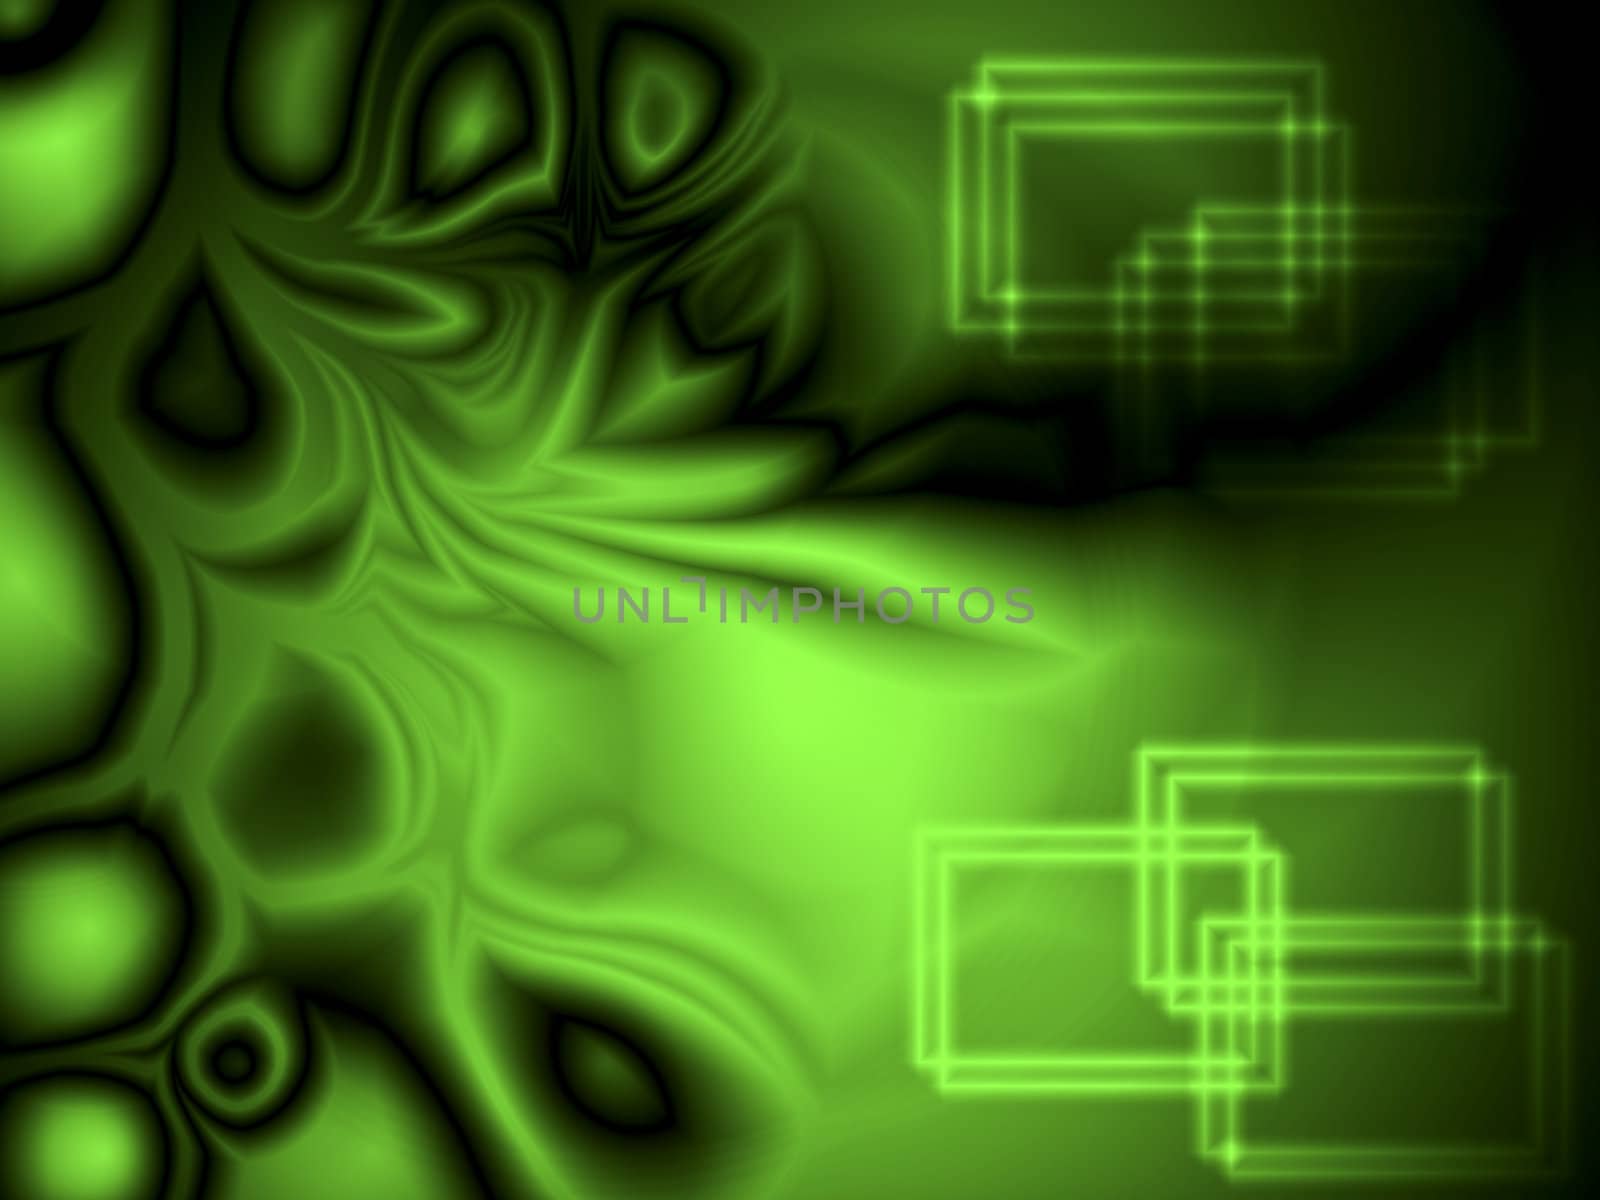 Green plasma and rectangle shapes background